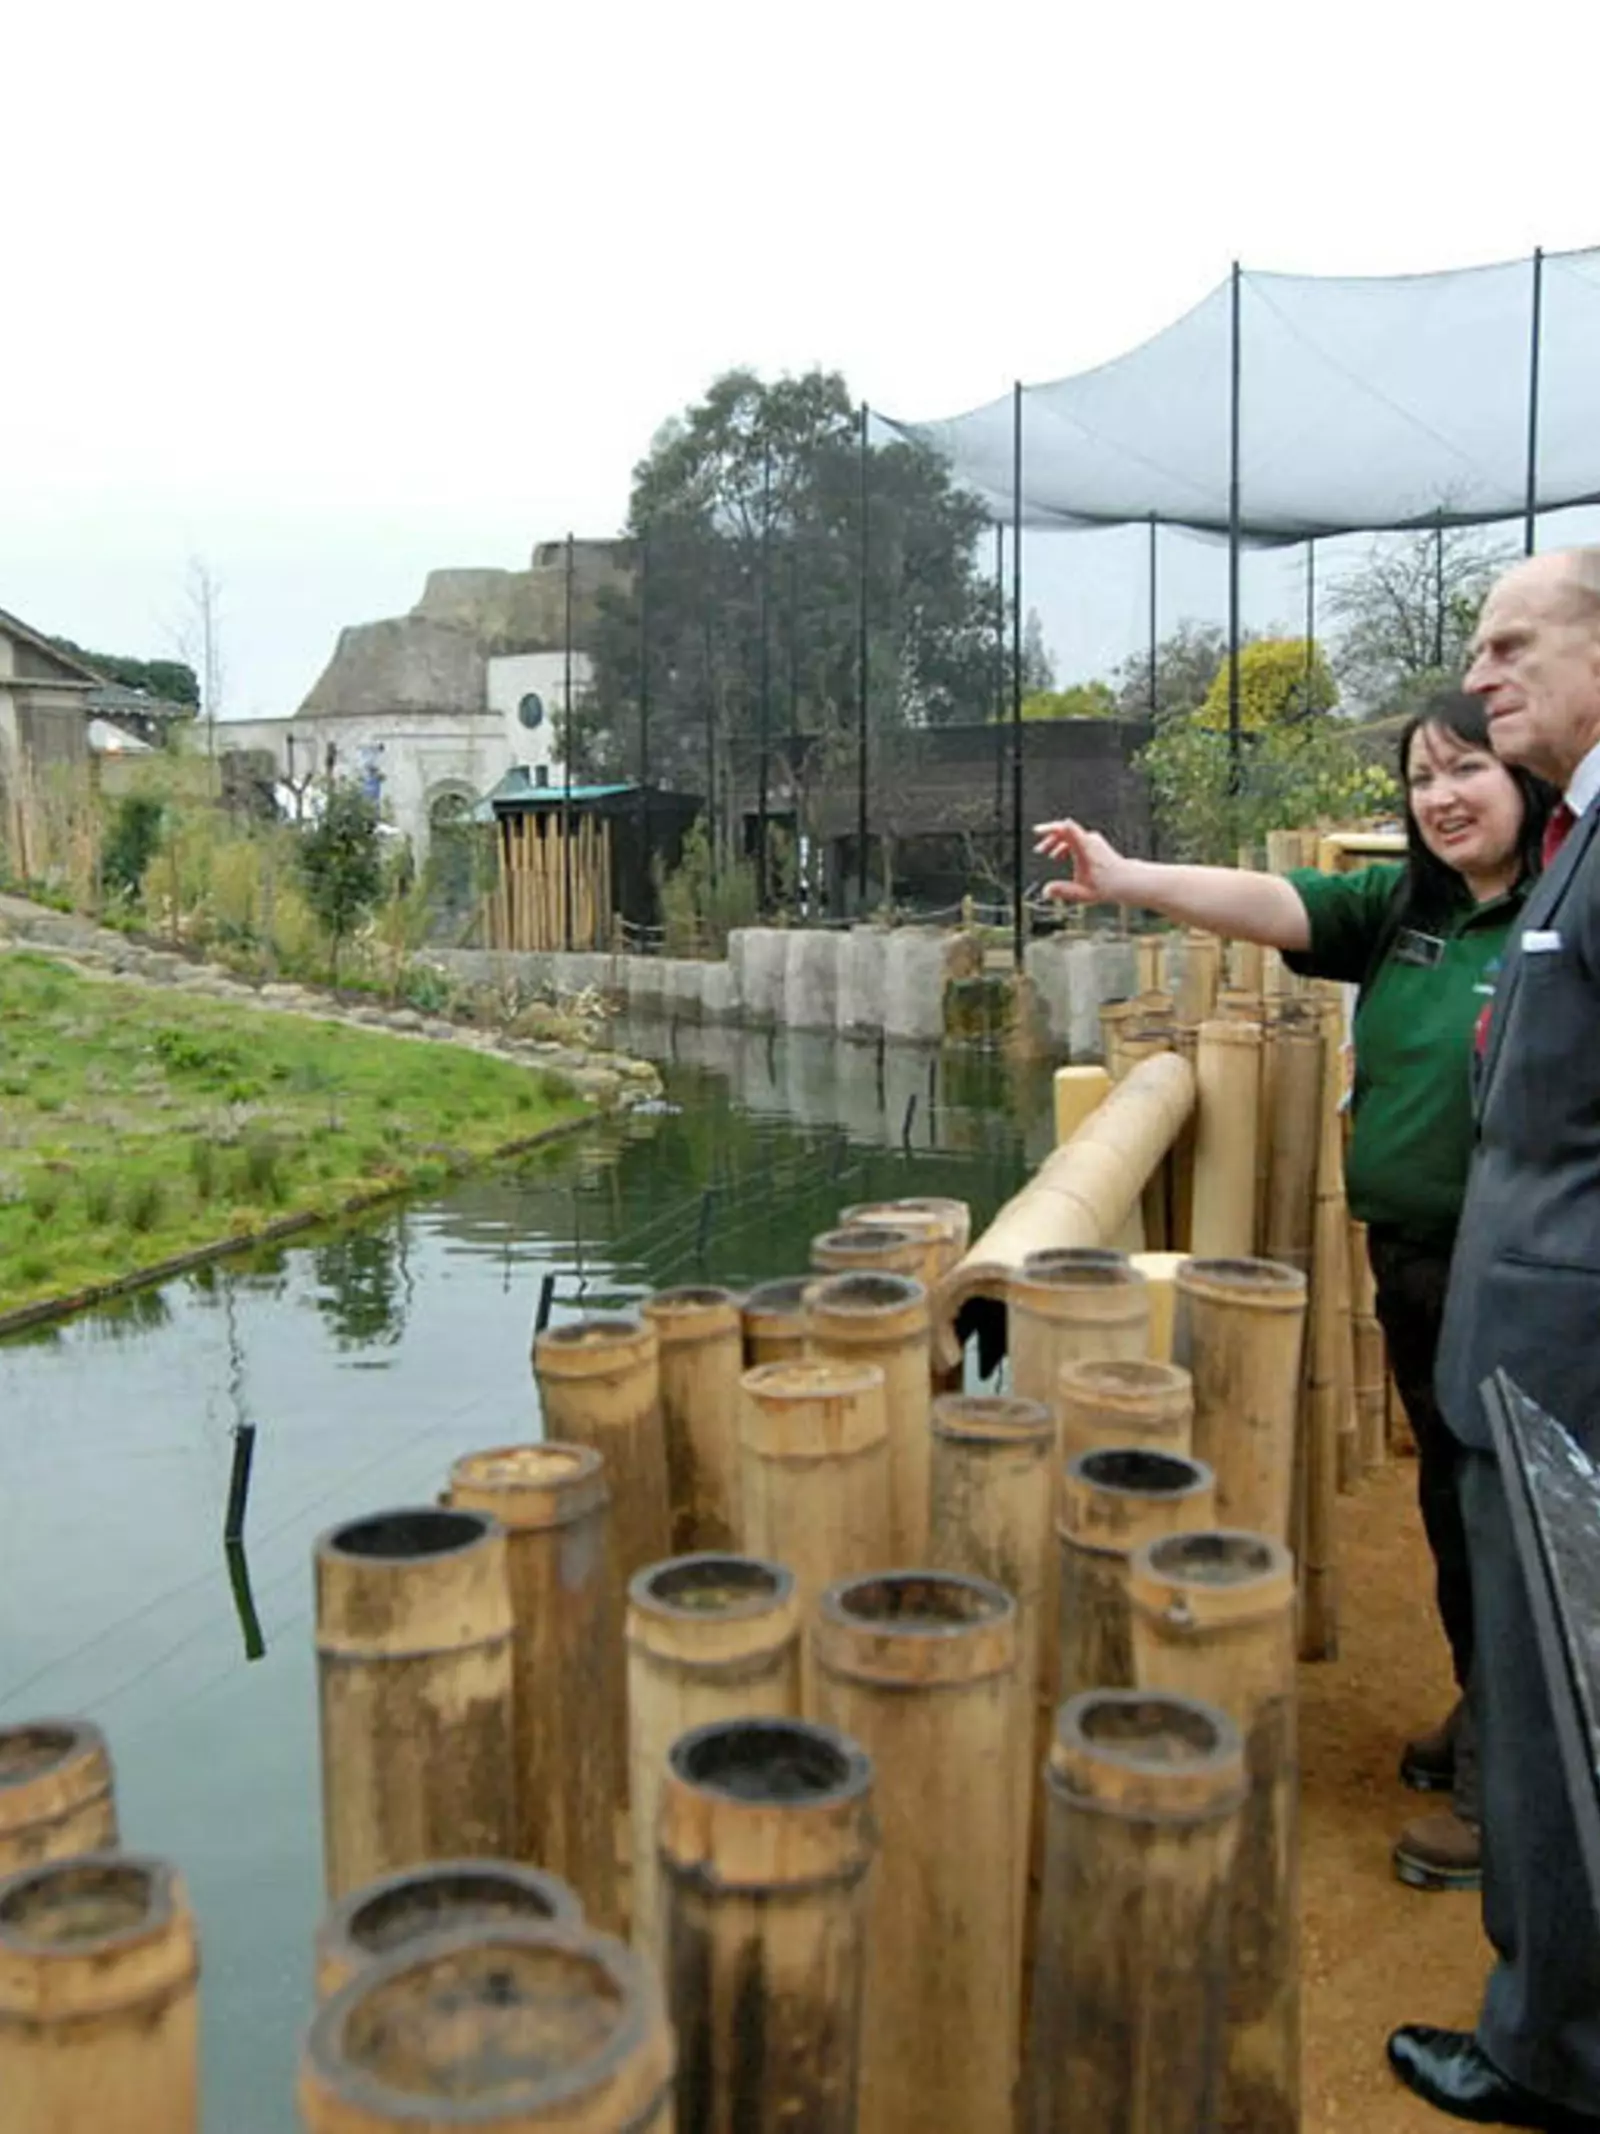 he official opening of Gorilla Kingdom at London Zoo by HRH The Duke of Edinburgh, March 2007